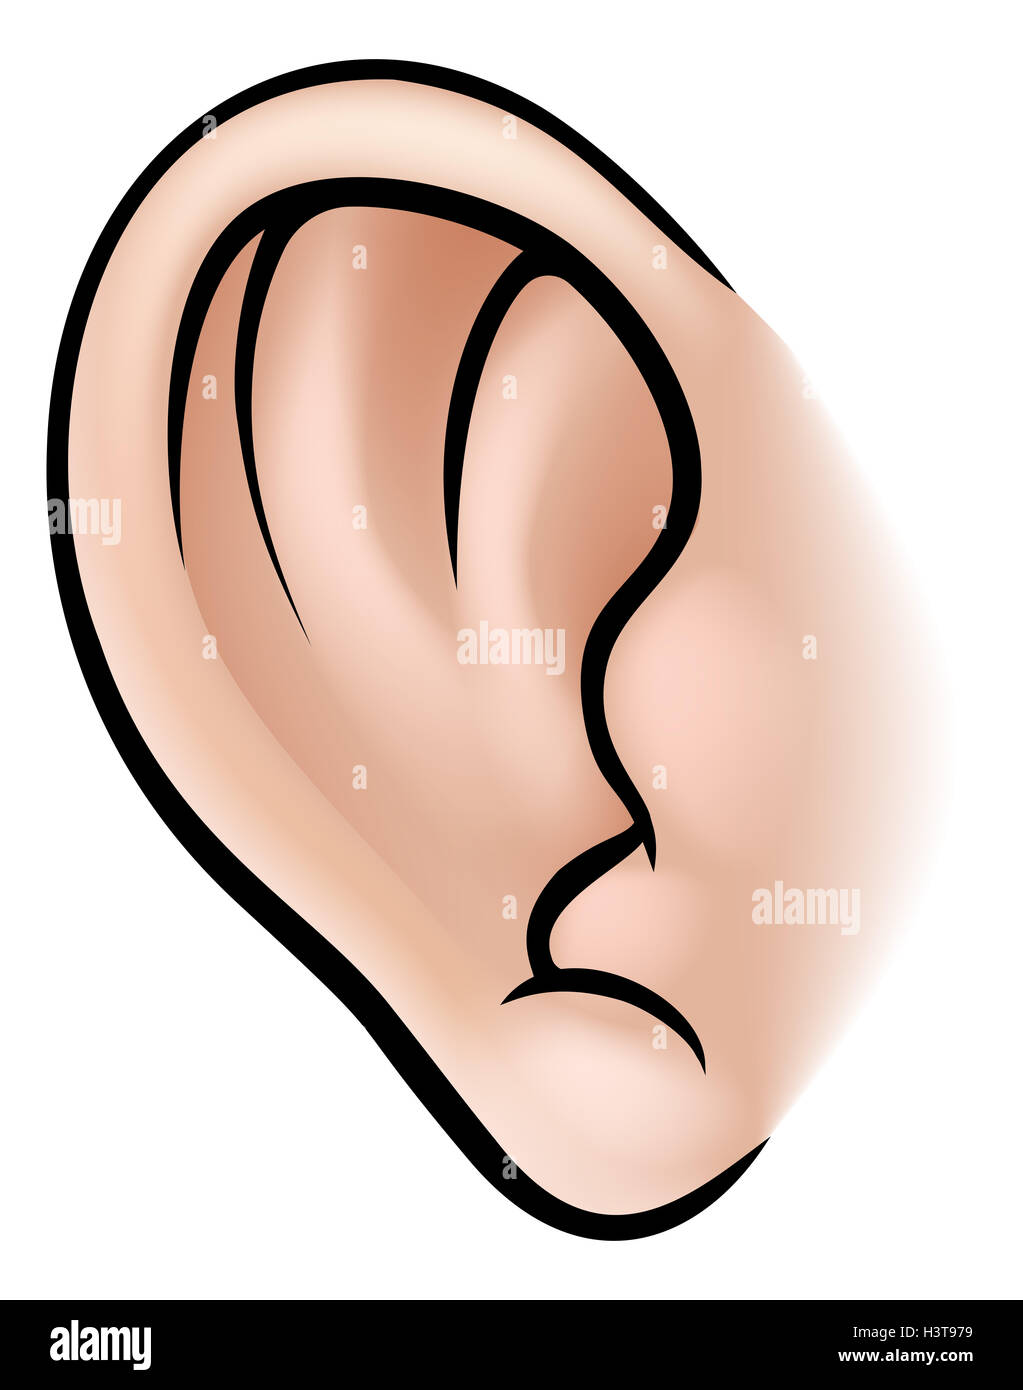 An illustration of a human ear body part Stock Photo